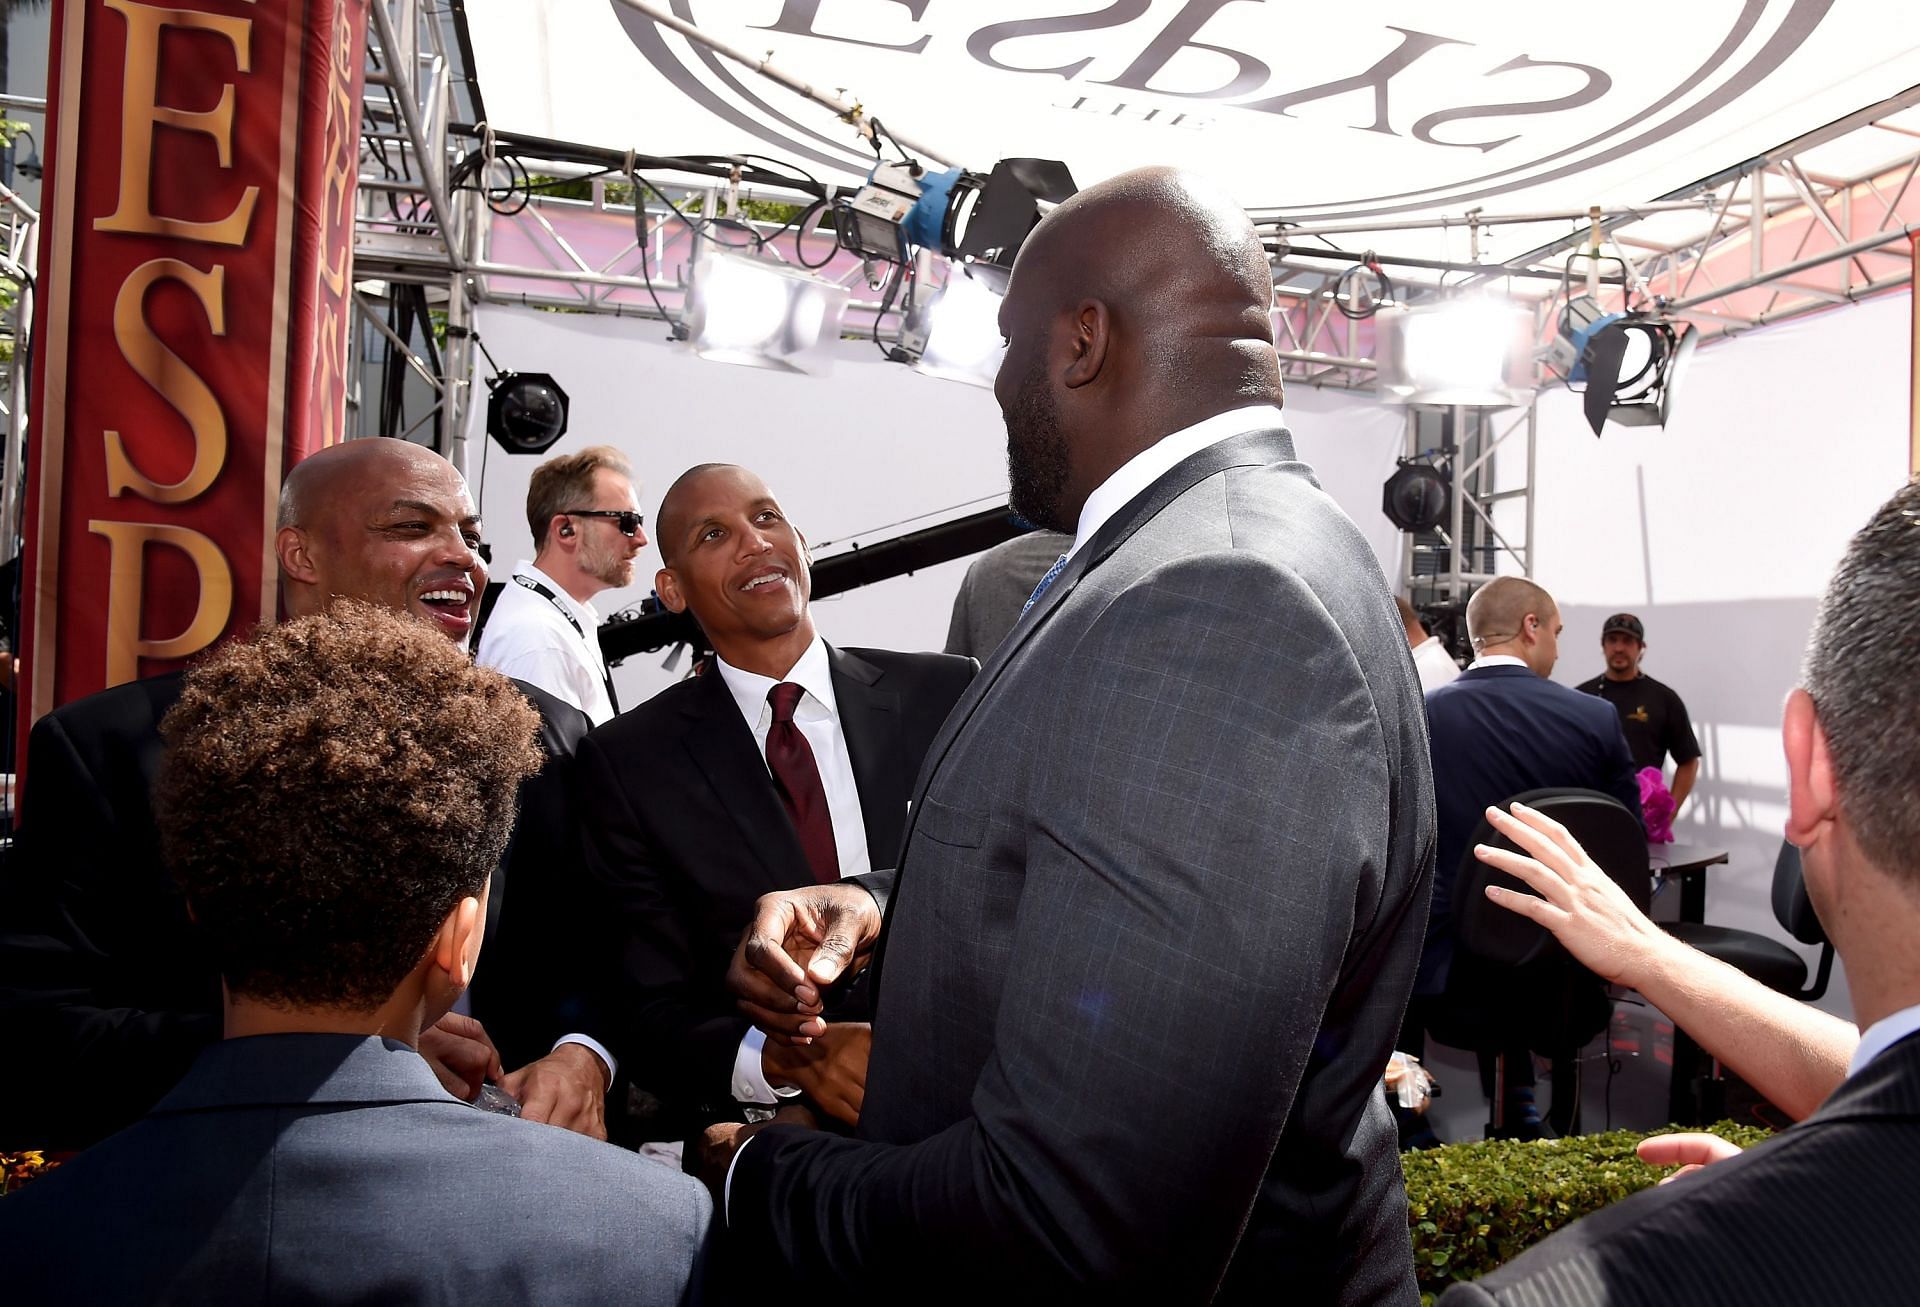 Charles Barkley, Reggie Miller and Shaq at the 2016 ESPYS